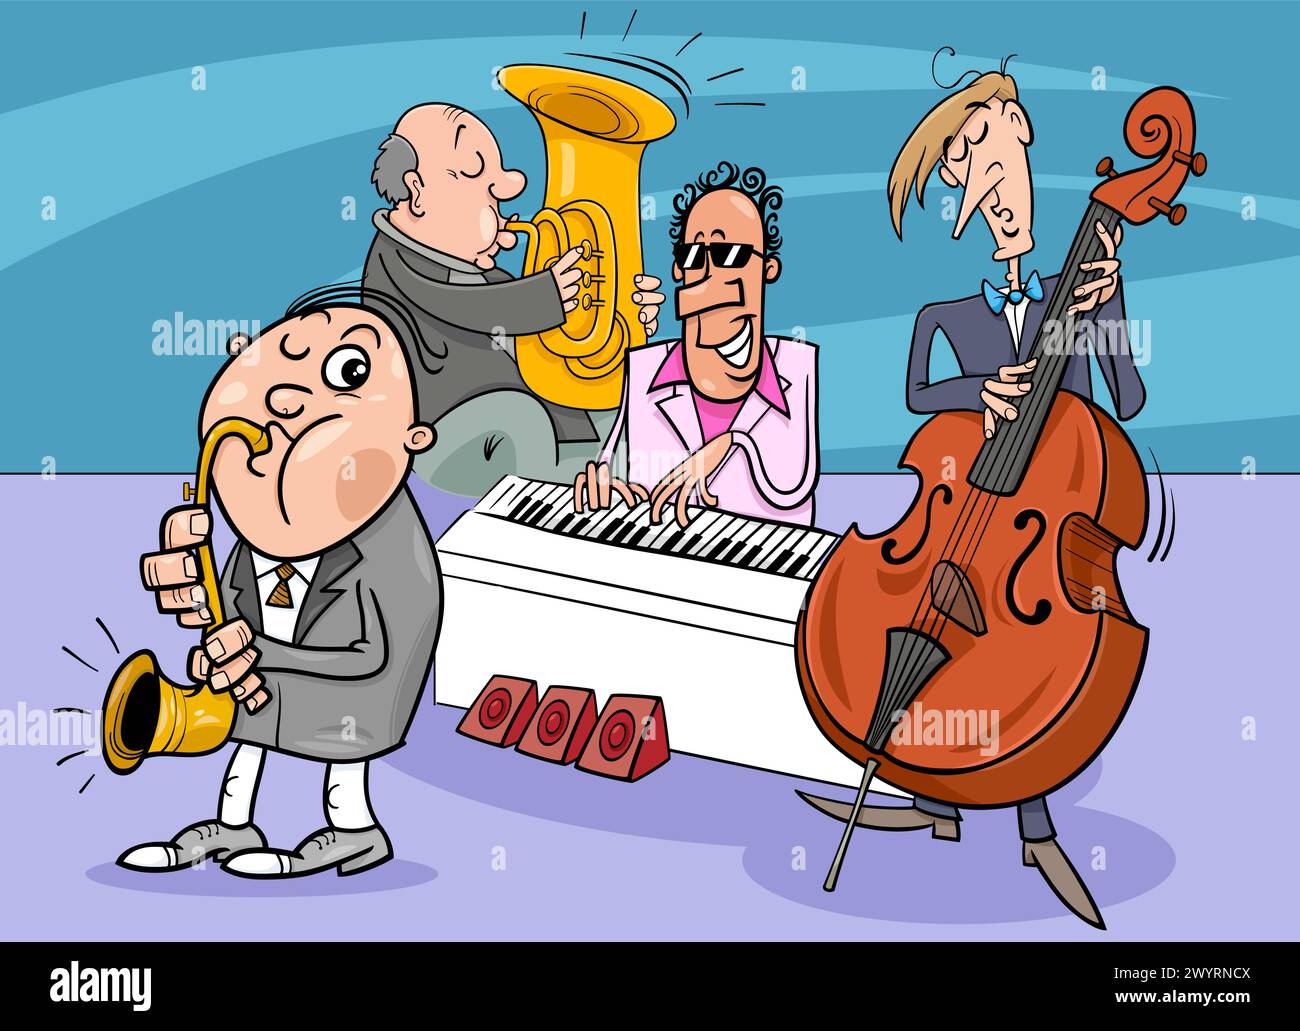 Cartoon illustration of jazz musicians band performing a concert Stock Vector